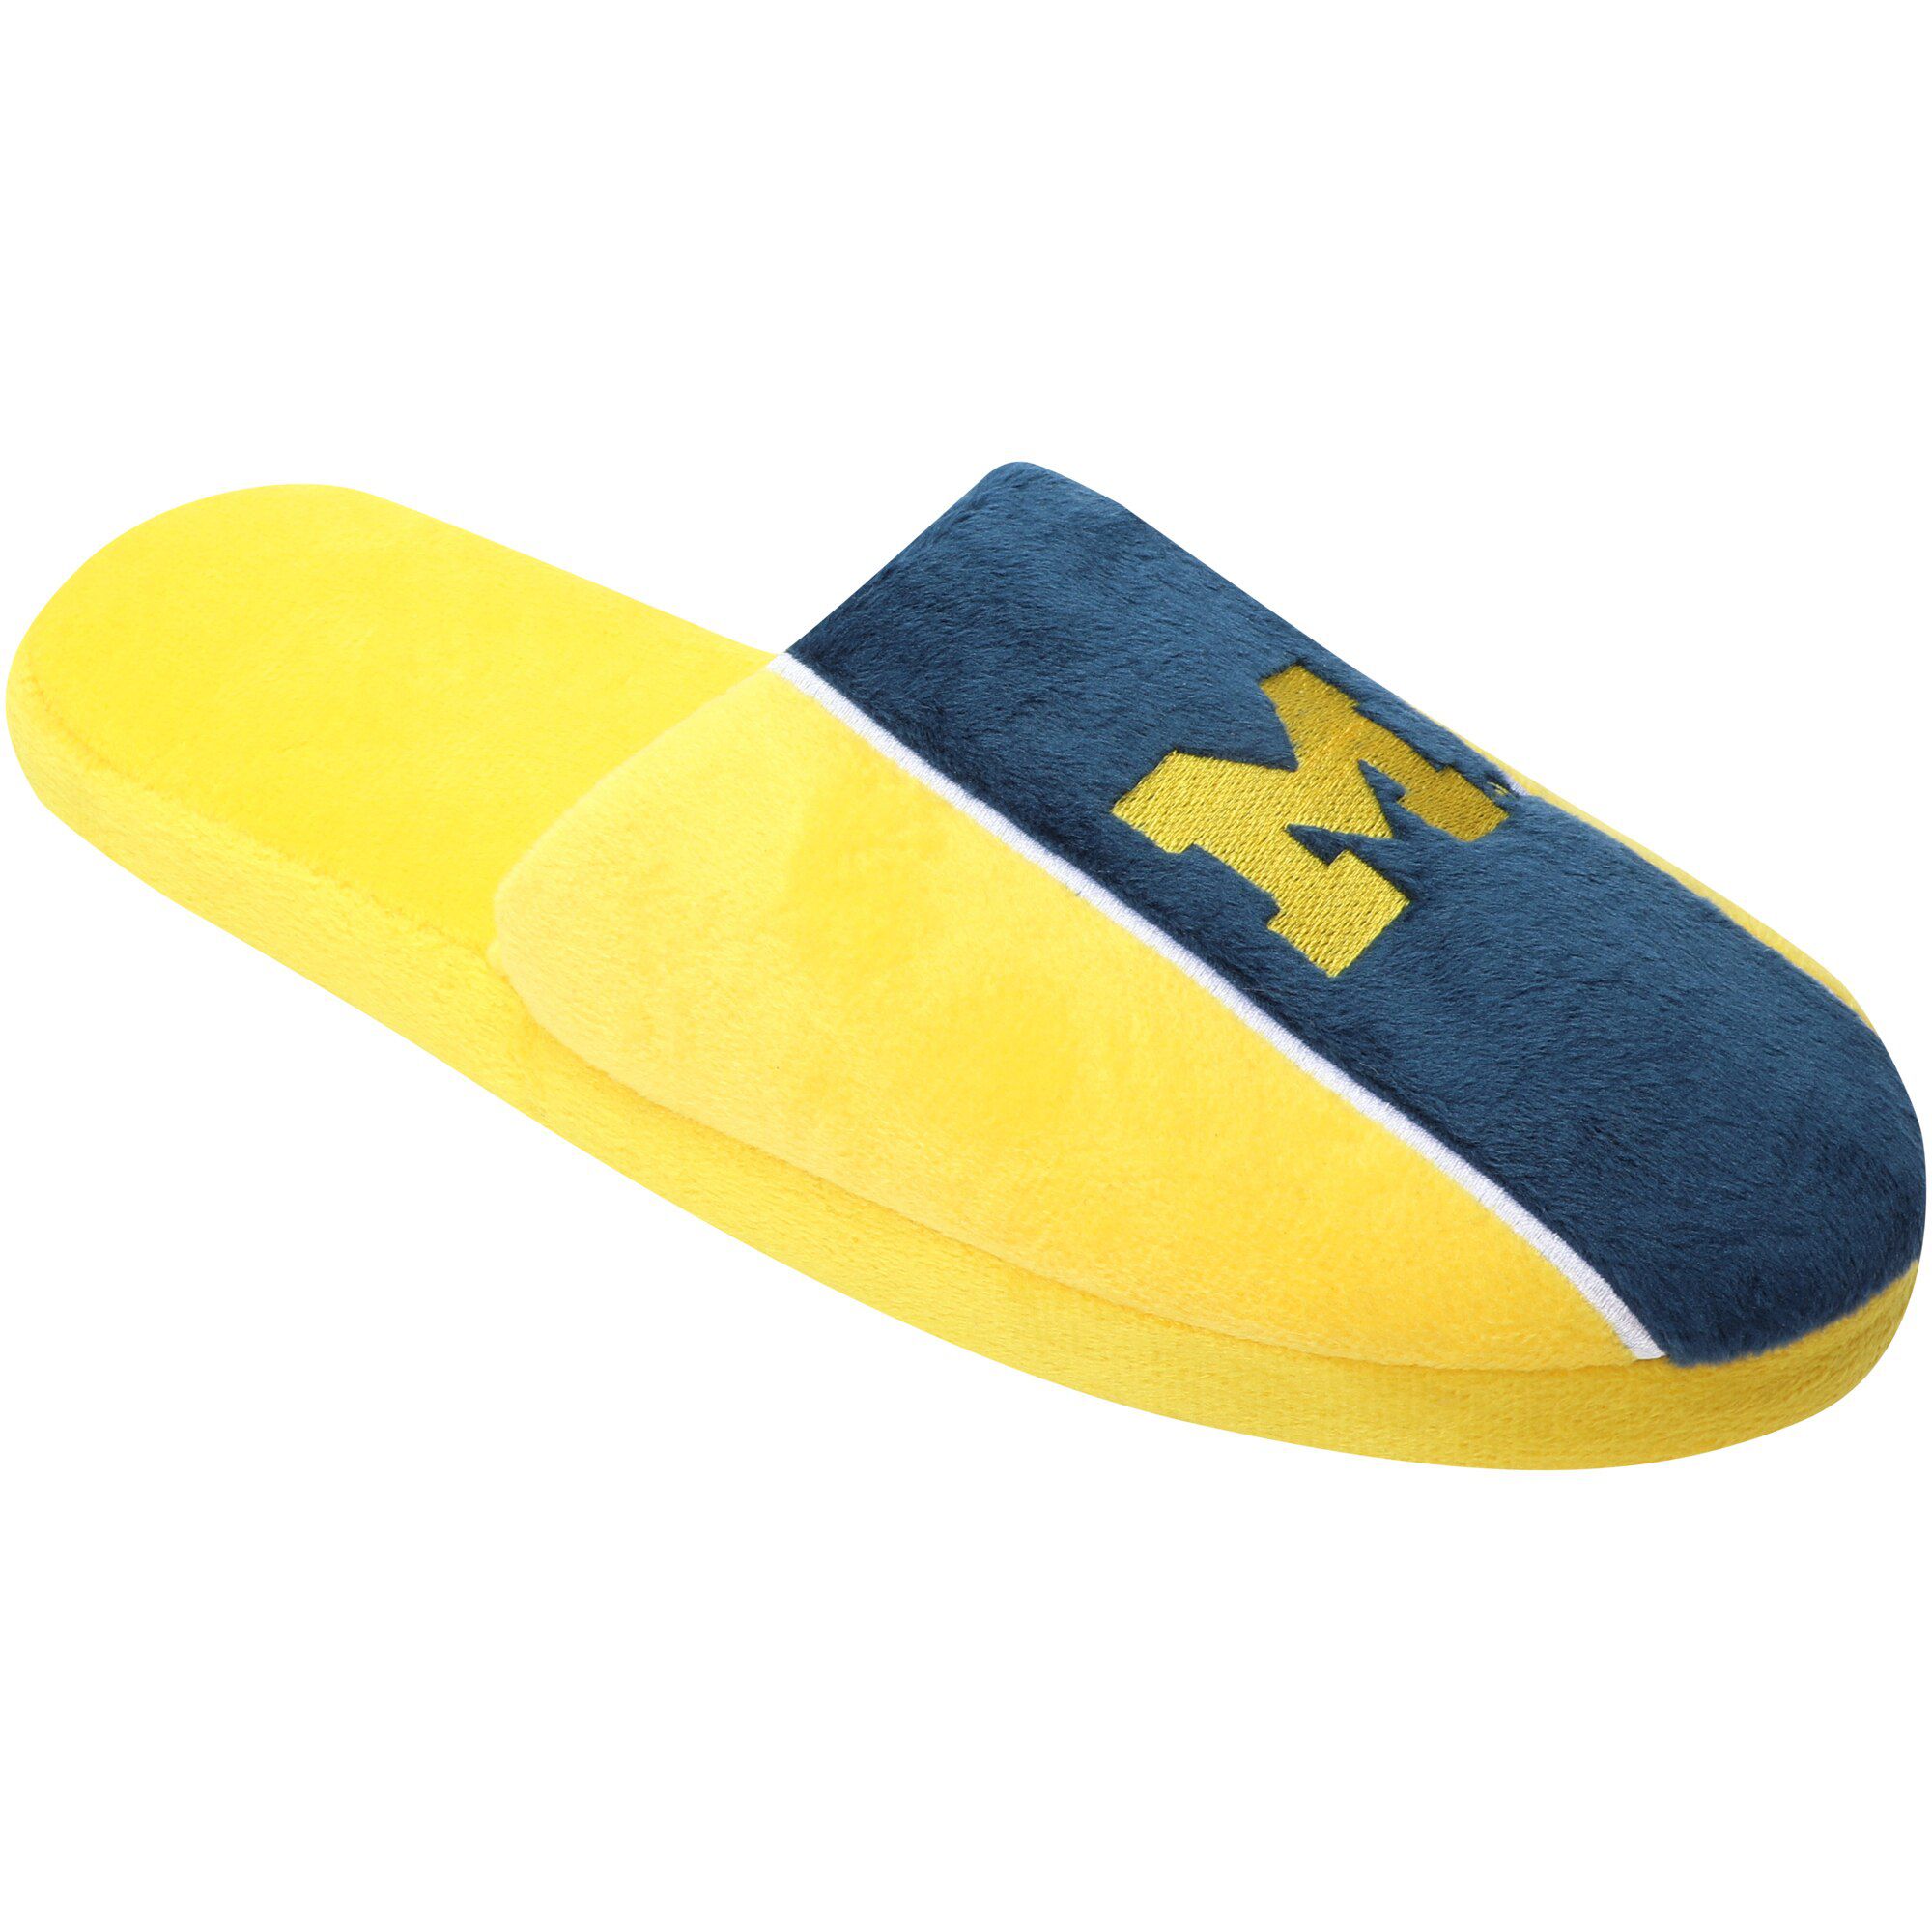 9-10 7-8 Michigan Wolverines Slippers Women's size Medium or Large New w/Tag 